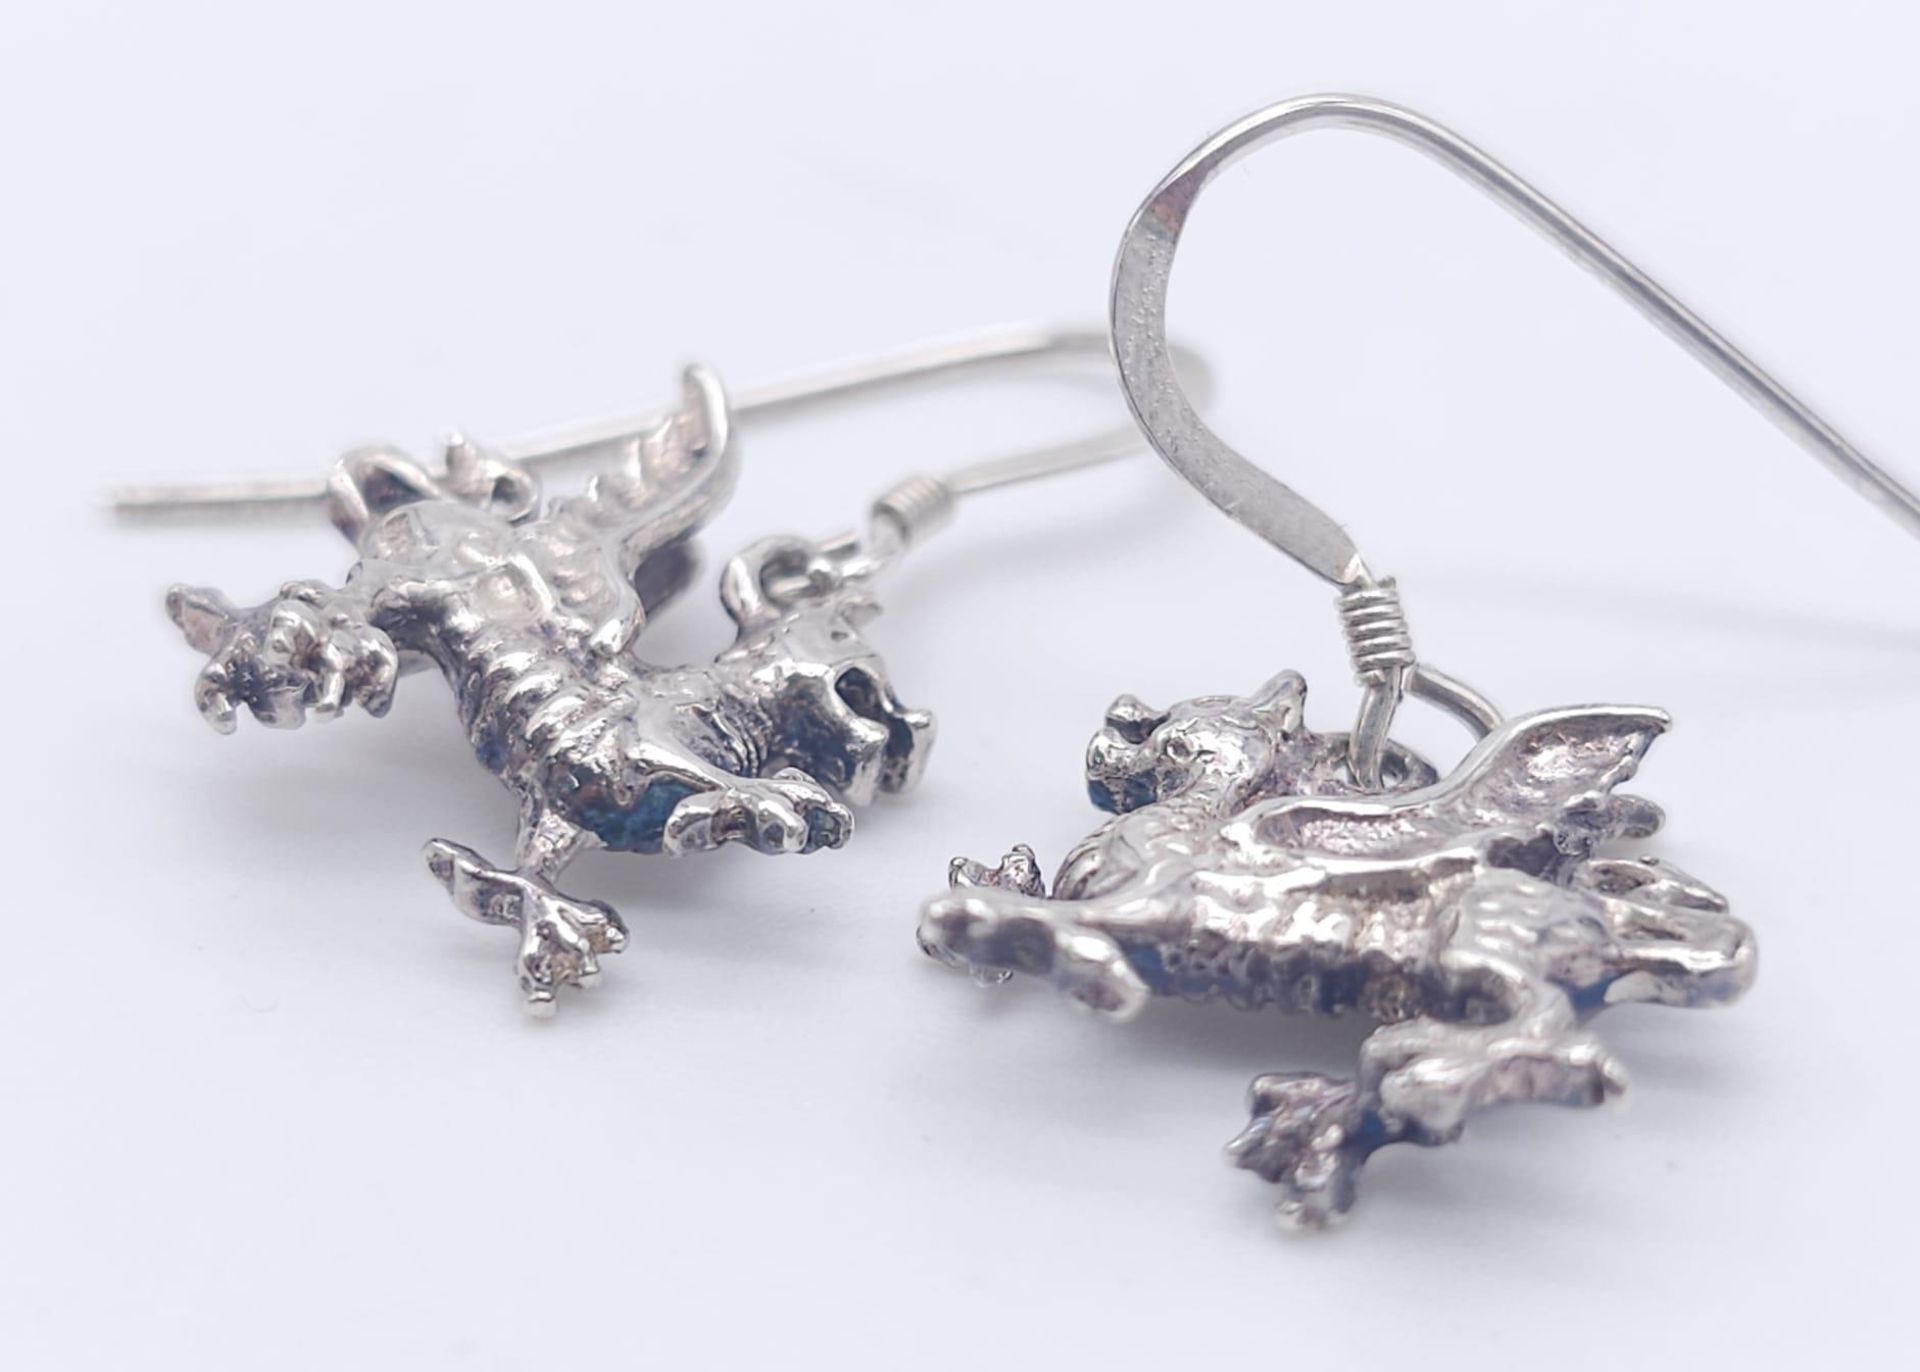 A STERLING SILVER WELSH DRAGON PAIR OF DROP EARRINGS AND MATCHING PENDANT / CHARM. 6.5G - Image 3 of 6